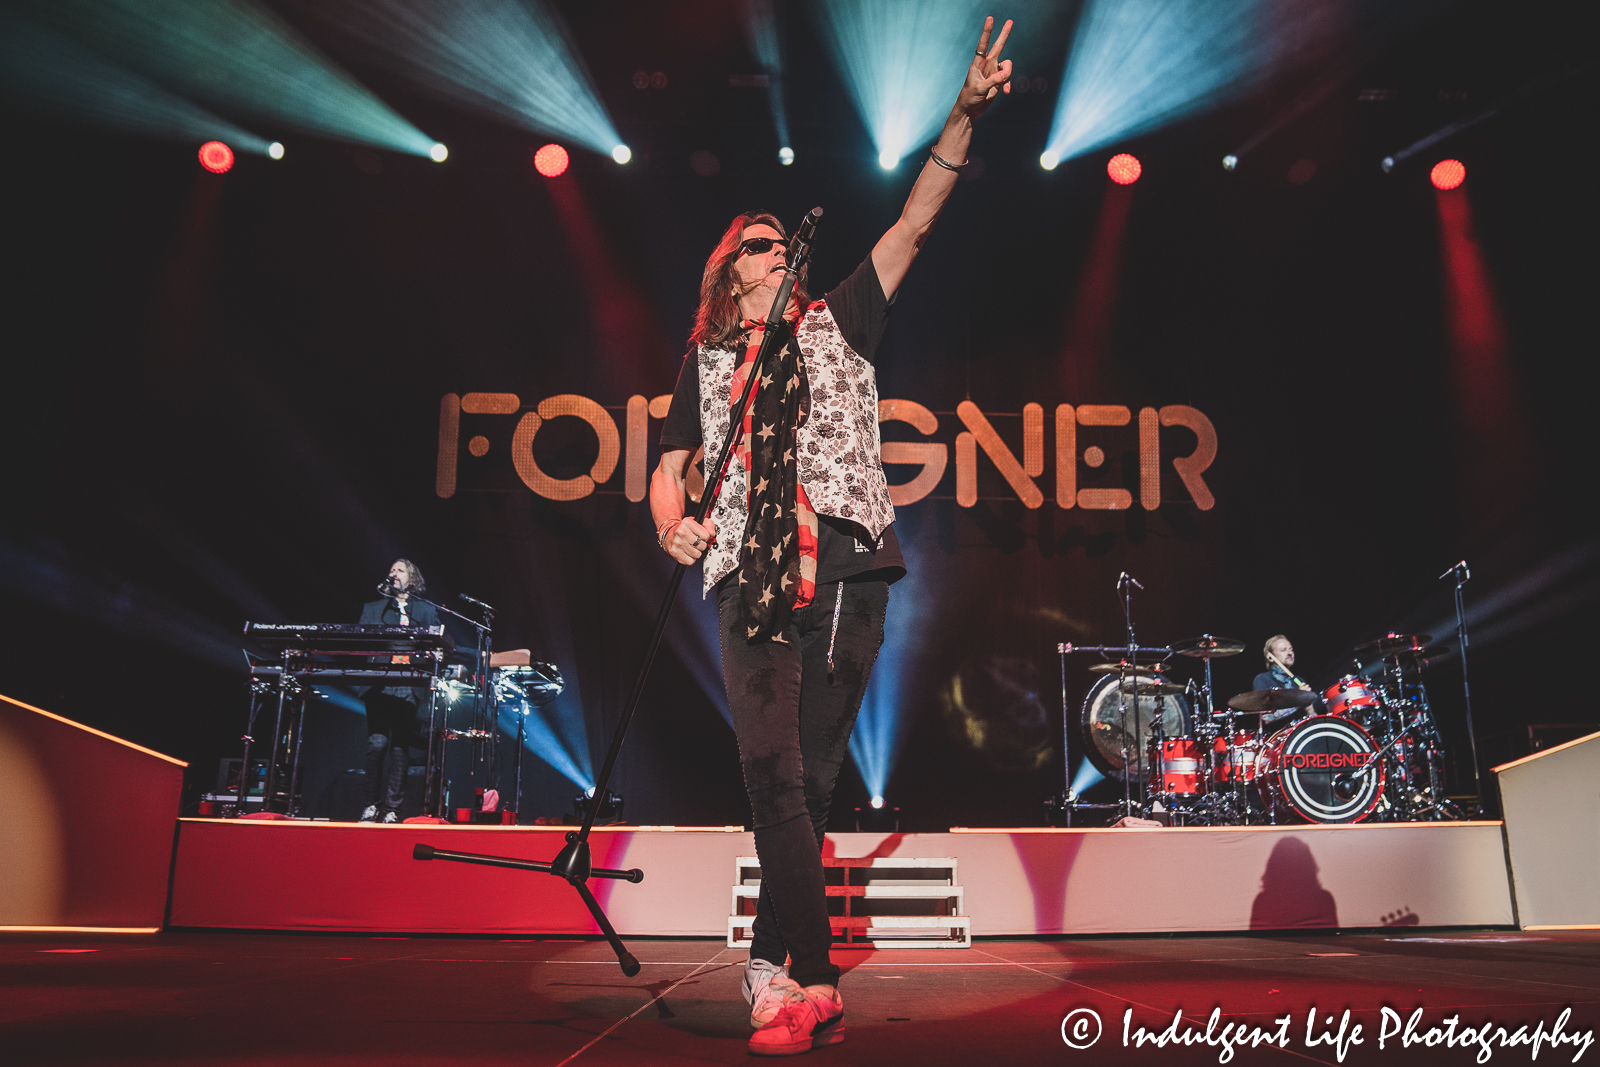 Frontman Kelly Hansen of Foreigner performing "Double Vision" with keyboard player Michael Bluestein and drummer Chris Frazier at Hartman Arena in Park City, KS on April 30, 2023.